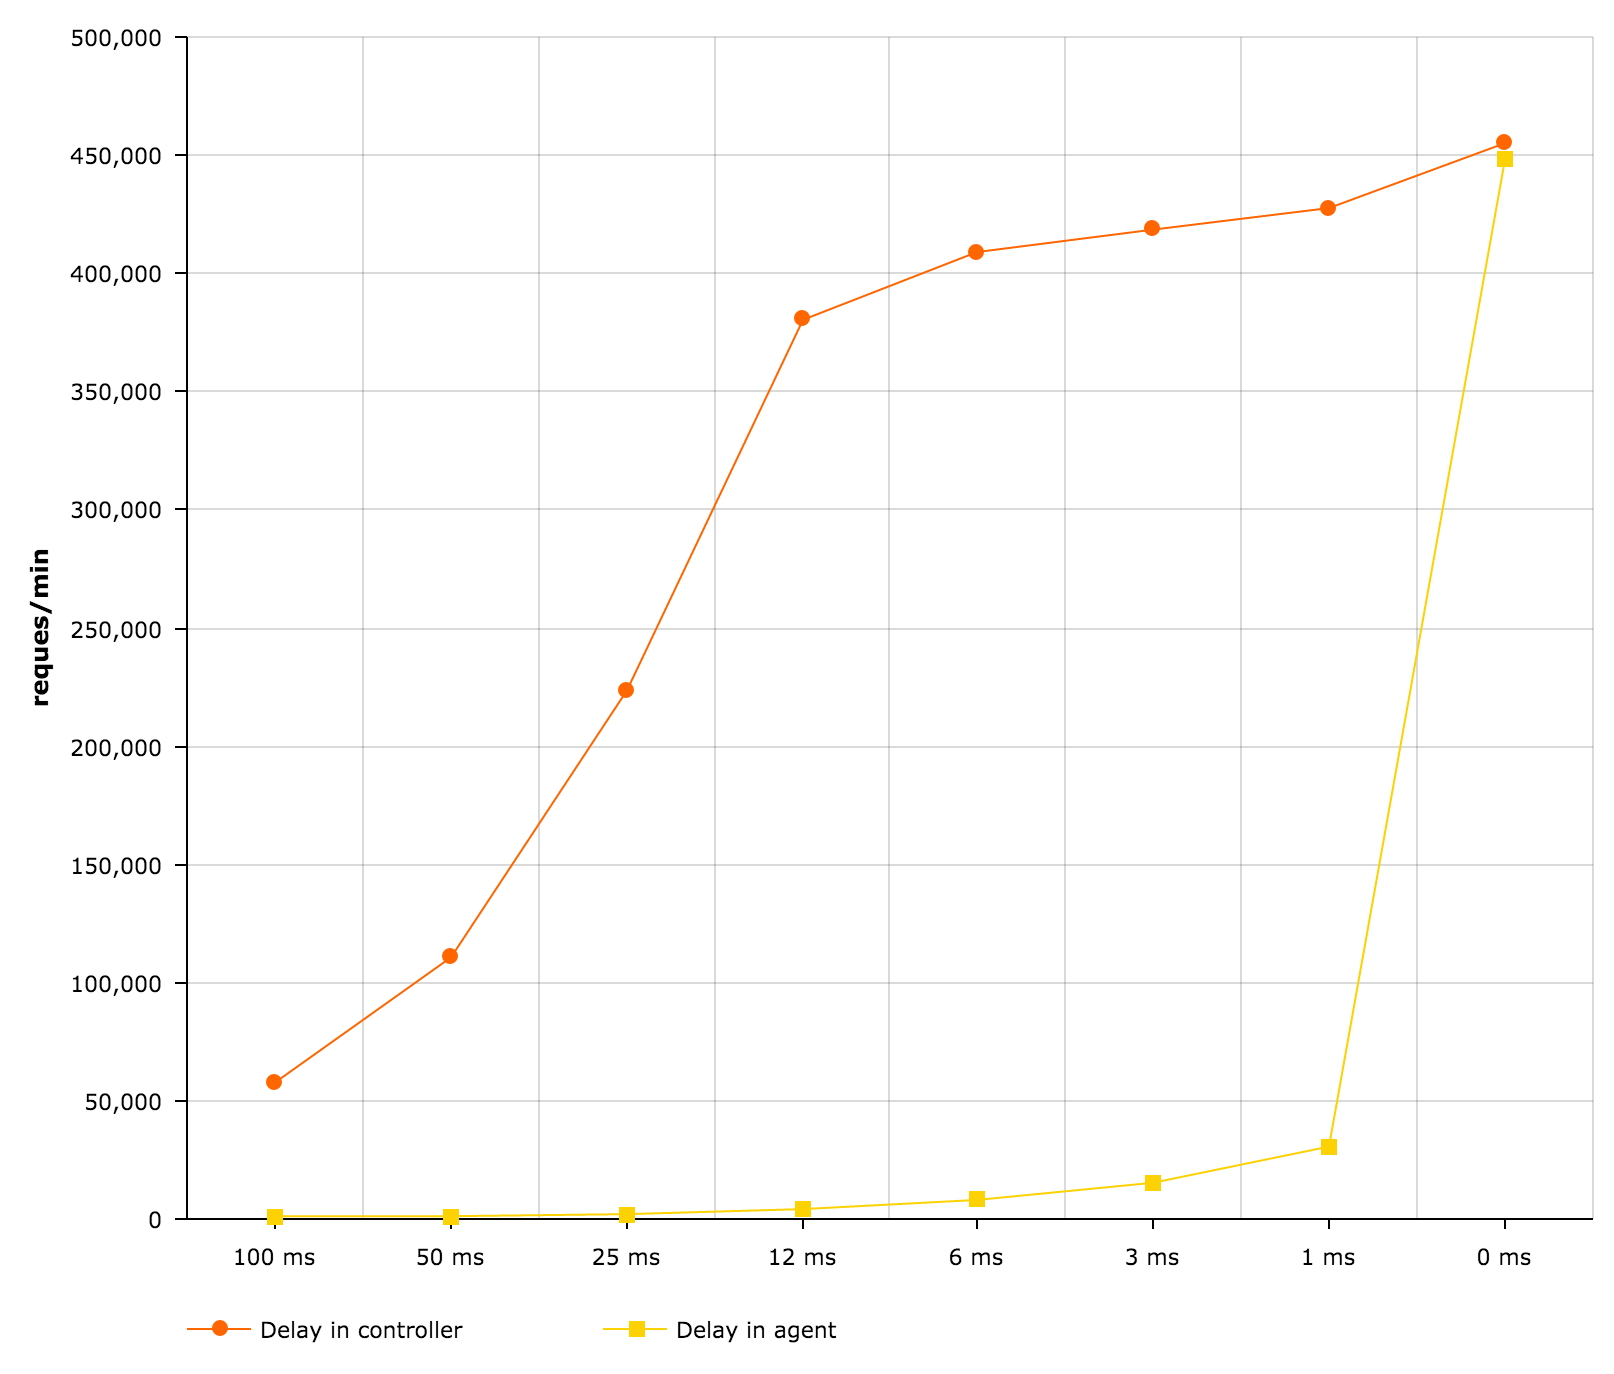 Requests per minute plotted against delays added to controller or agent